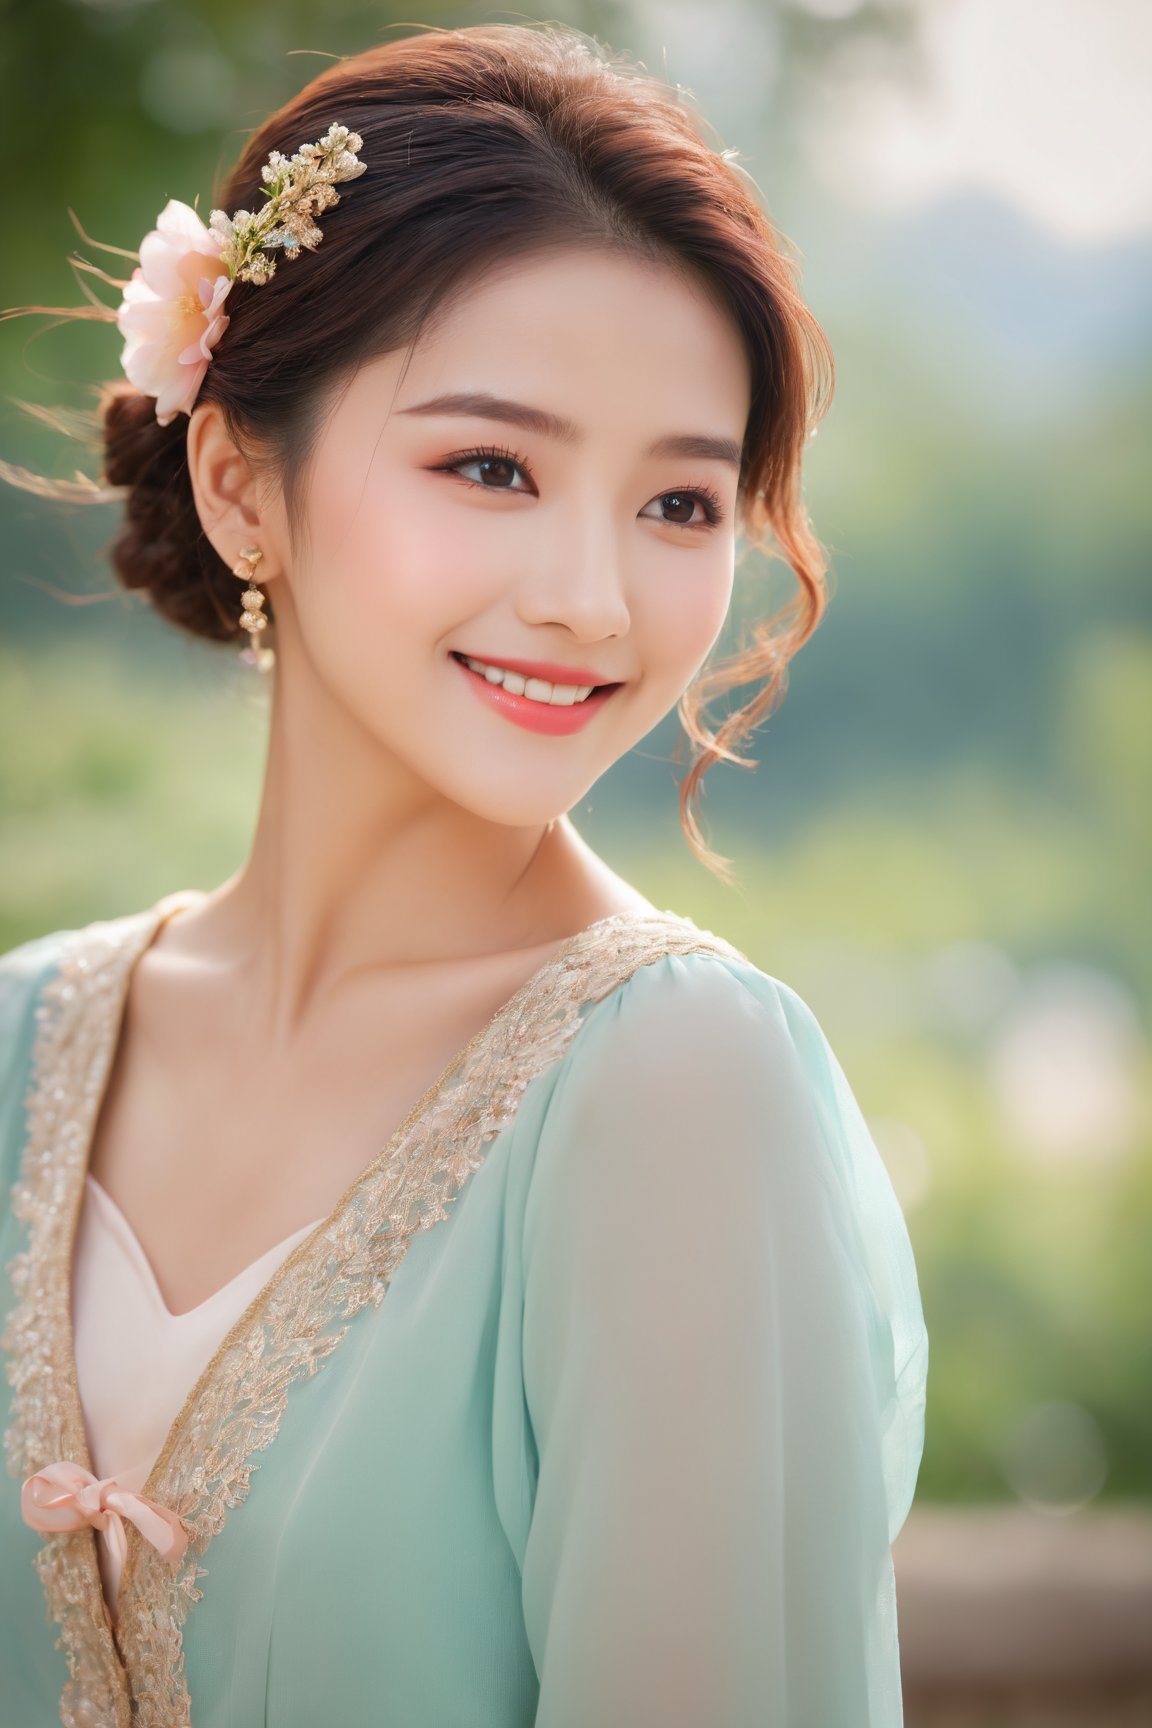 (best quality,4k,8k,highres,masterpiece:1.2),ultra-detailed,(realistic,photorealistic,photo-realistic:1.37),1girl,cute,beautiful detailed eyes,beautiful detailed lips,extremely detailed eyes and face,longeyelashes,Korean-style makeup,glowing skin,flawless complexion,vibrant colors,soft lighting,pastel color palette,playful expression,adorable smile,blush on cheeks,dewy look,feminine appearance,lovely hairstyle,neatly arranged hair,flower hairpin,colorful clothes,stylish outfit,pulling back a strand of hair,image with depth and dimension,soft and airy background,shallow depth of field,bokeh effect,gentle poses,expressive eyes,subtle shadows,sweet and innocent look,positive and joyful mood,warm and friendly ambiance,feeling of youth and charm,simple and clean composition